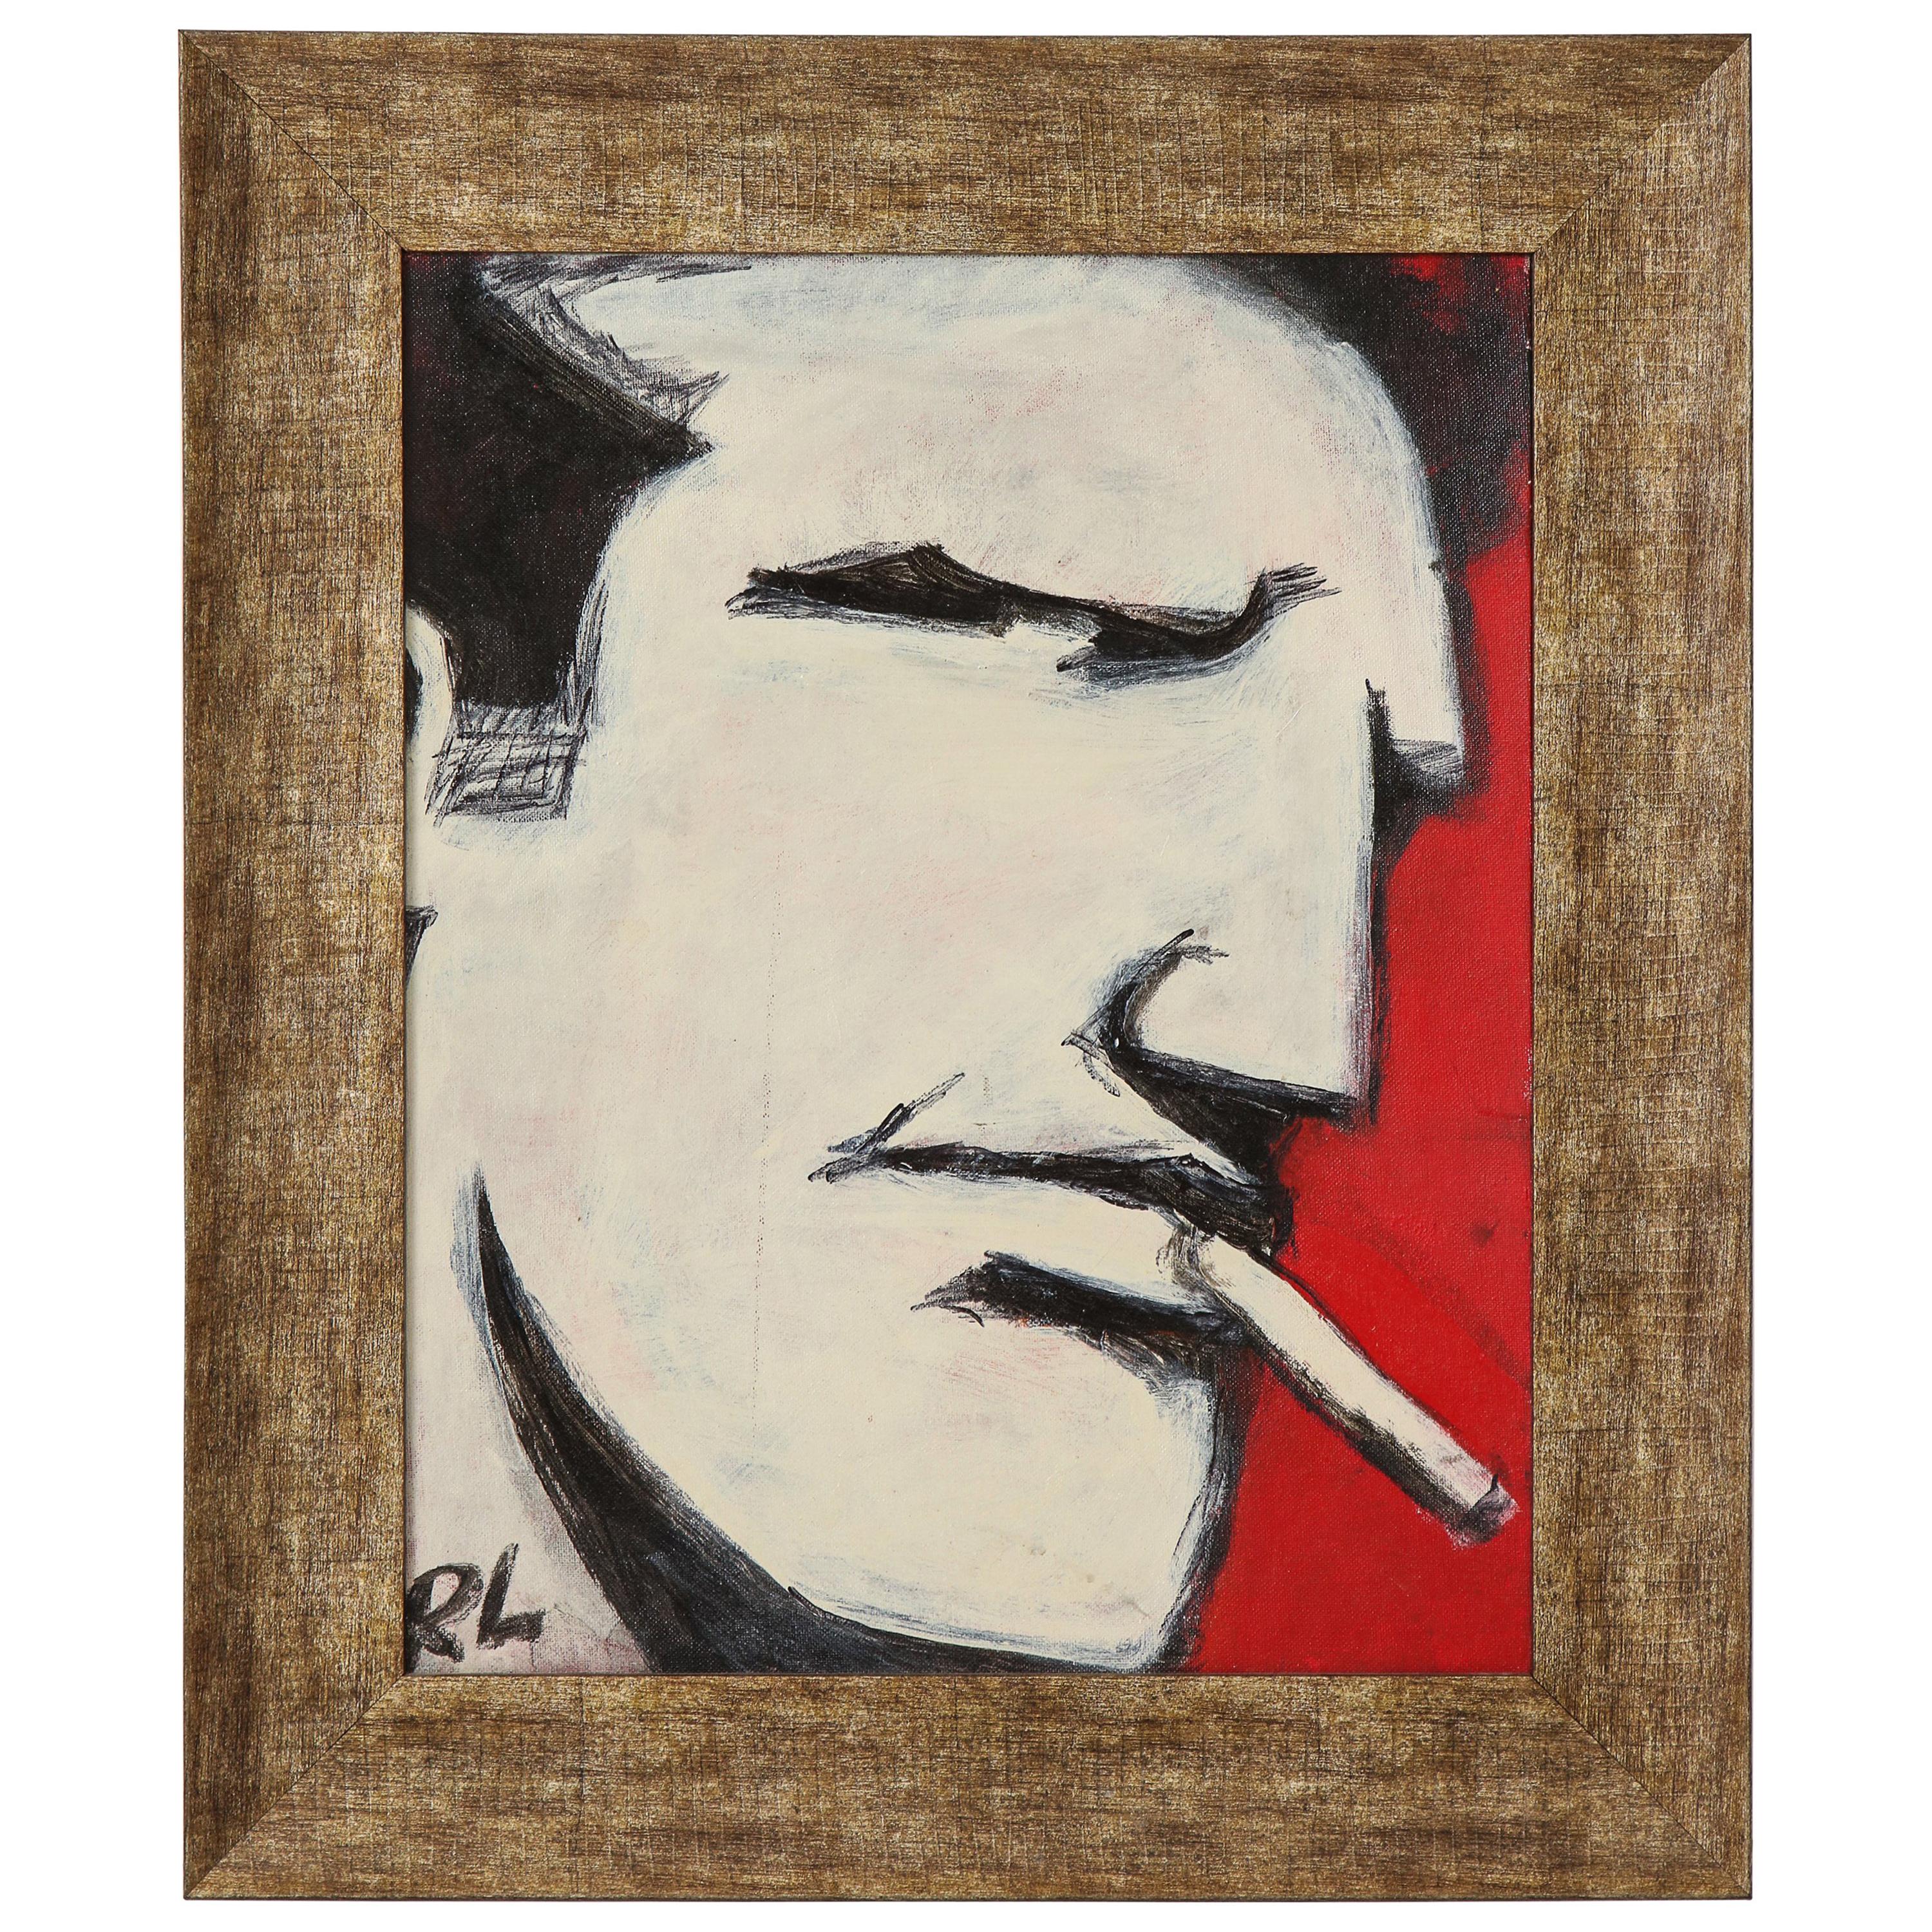 Robert Loughlin, Billy Beer, Painting on Canvas Panel, White, Black, Red, Signed